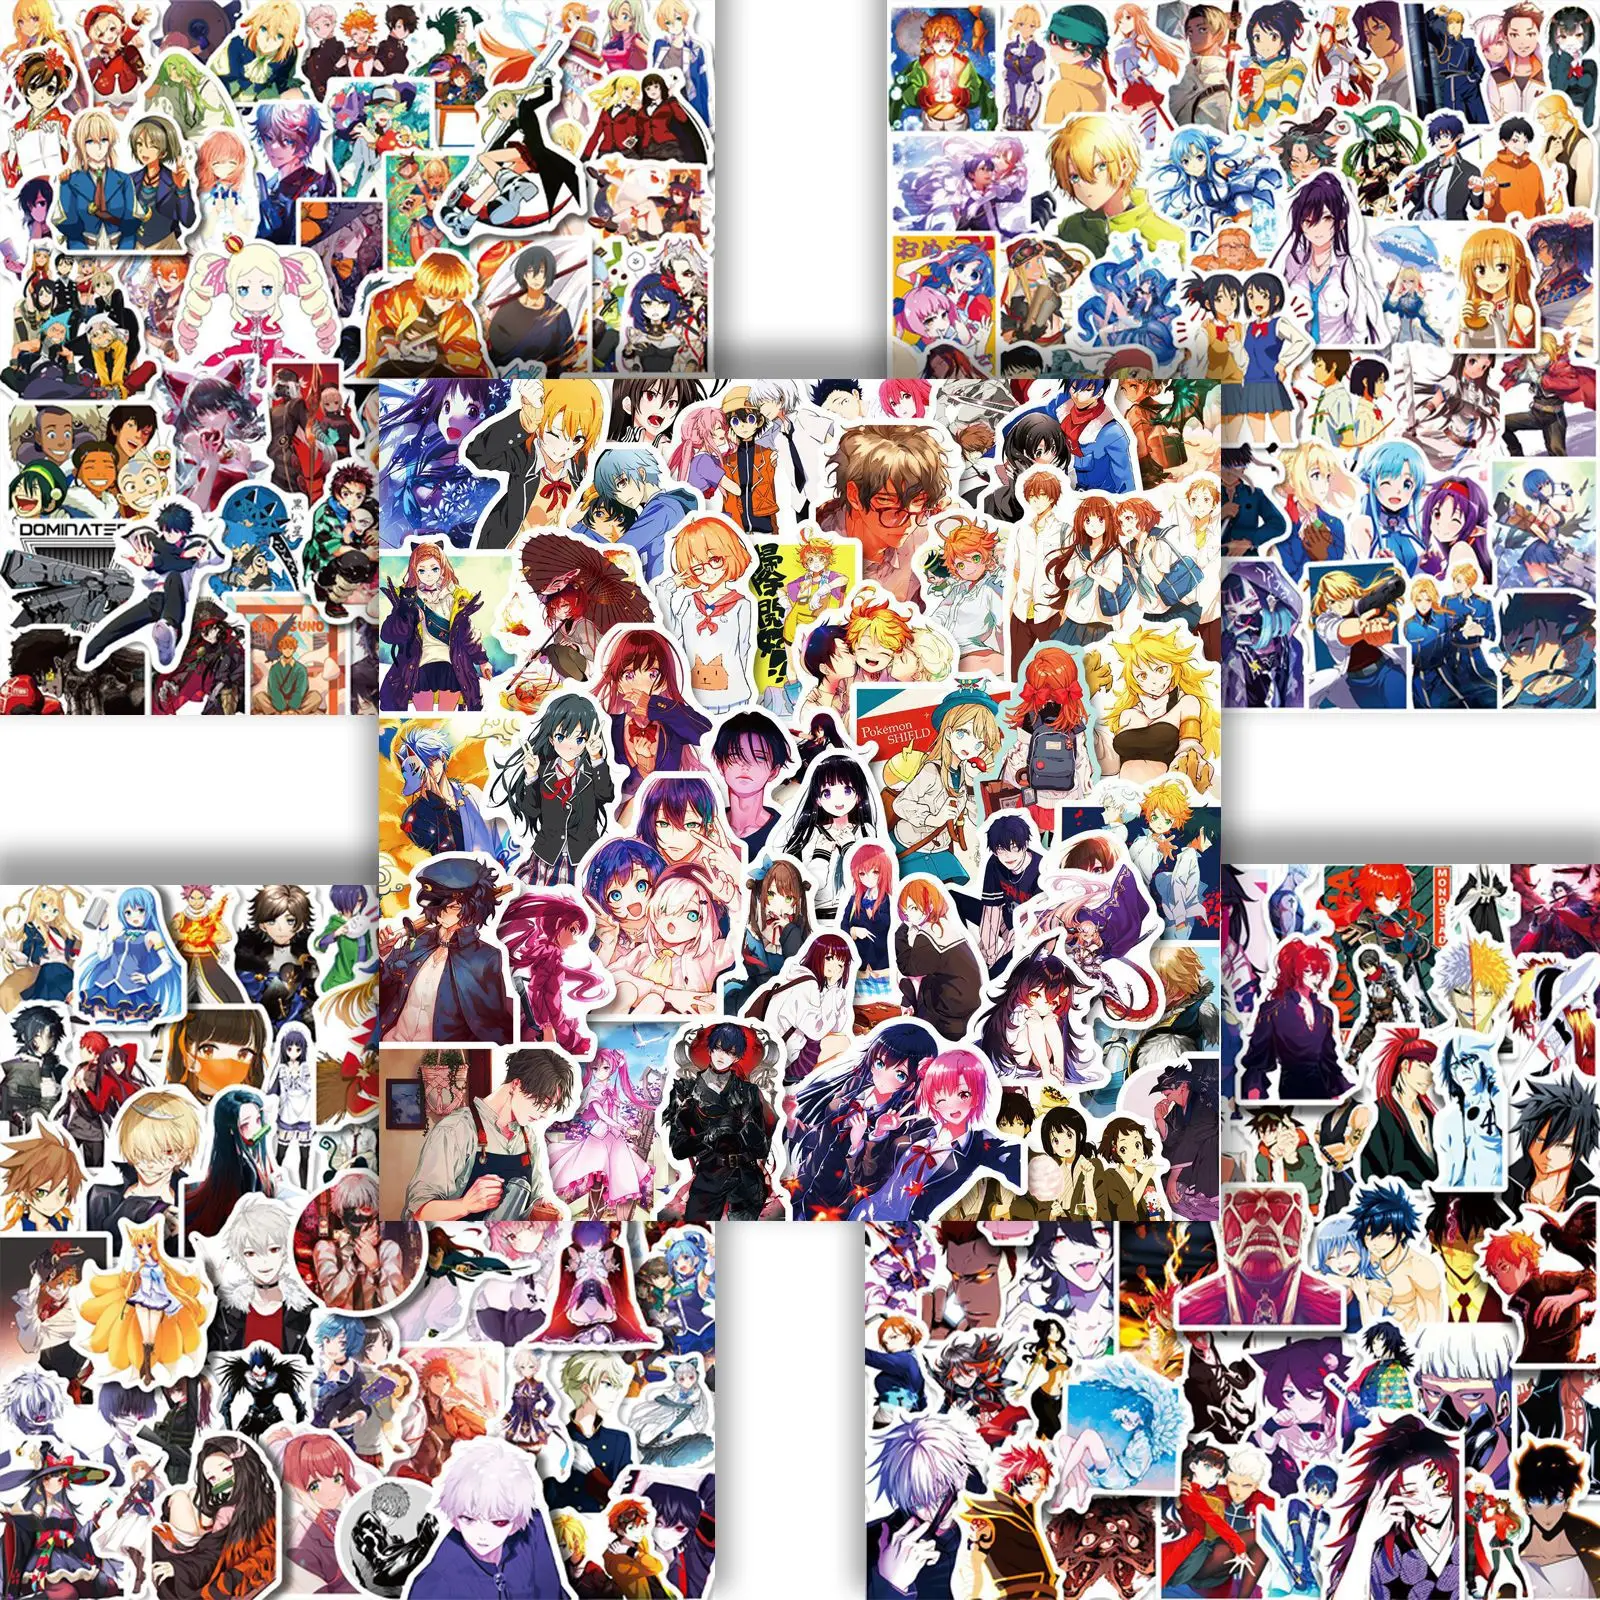 

50-500 Anime Collection Stickers Mix and Match At Will for Laptops, Mobiles, Computers, Scooters, Graffiti Stickers